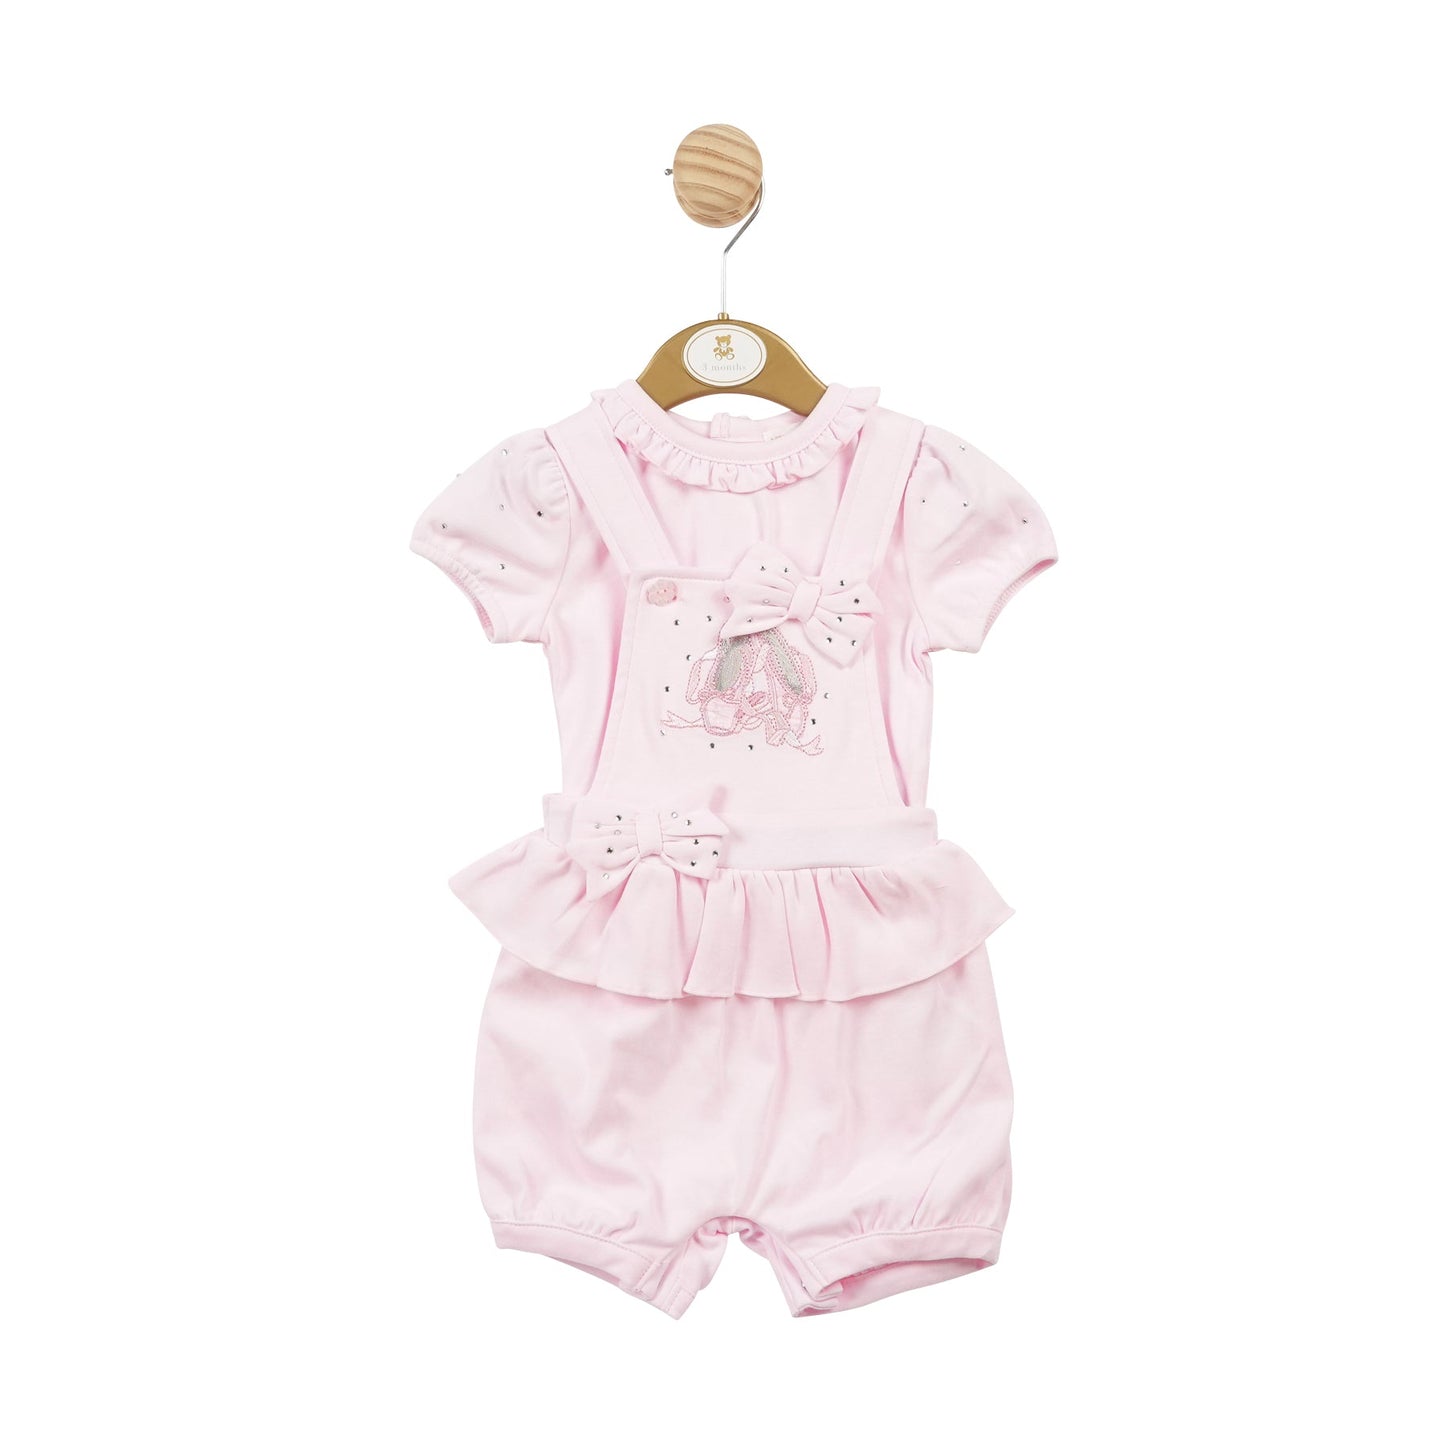 Baby Pink Ballet Shoe Top and Short Dungaree